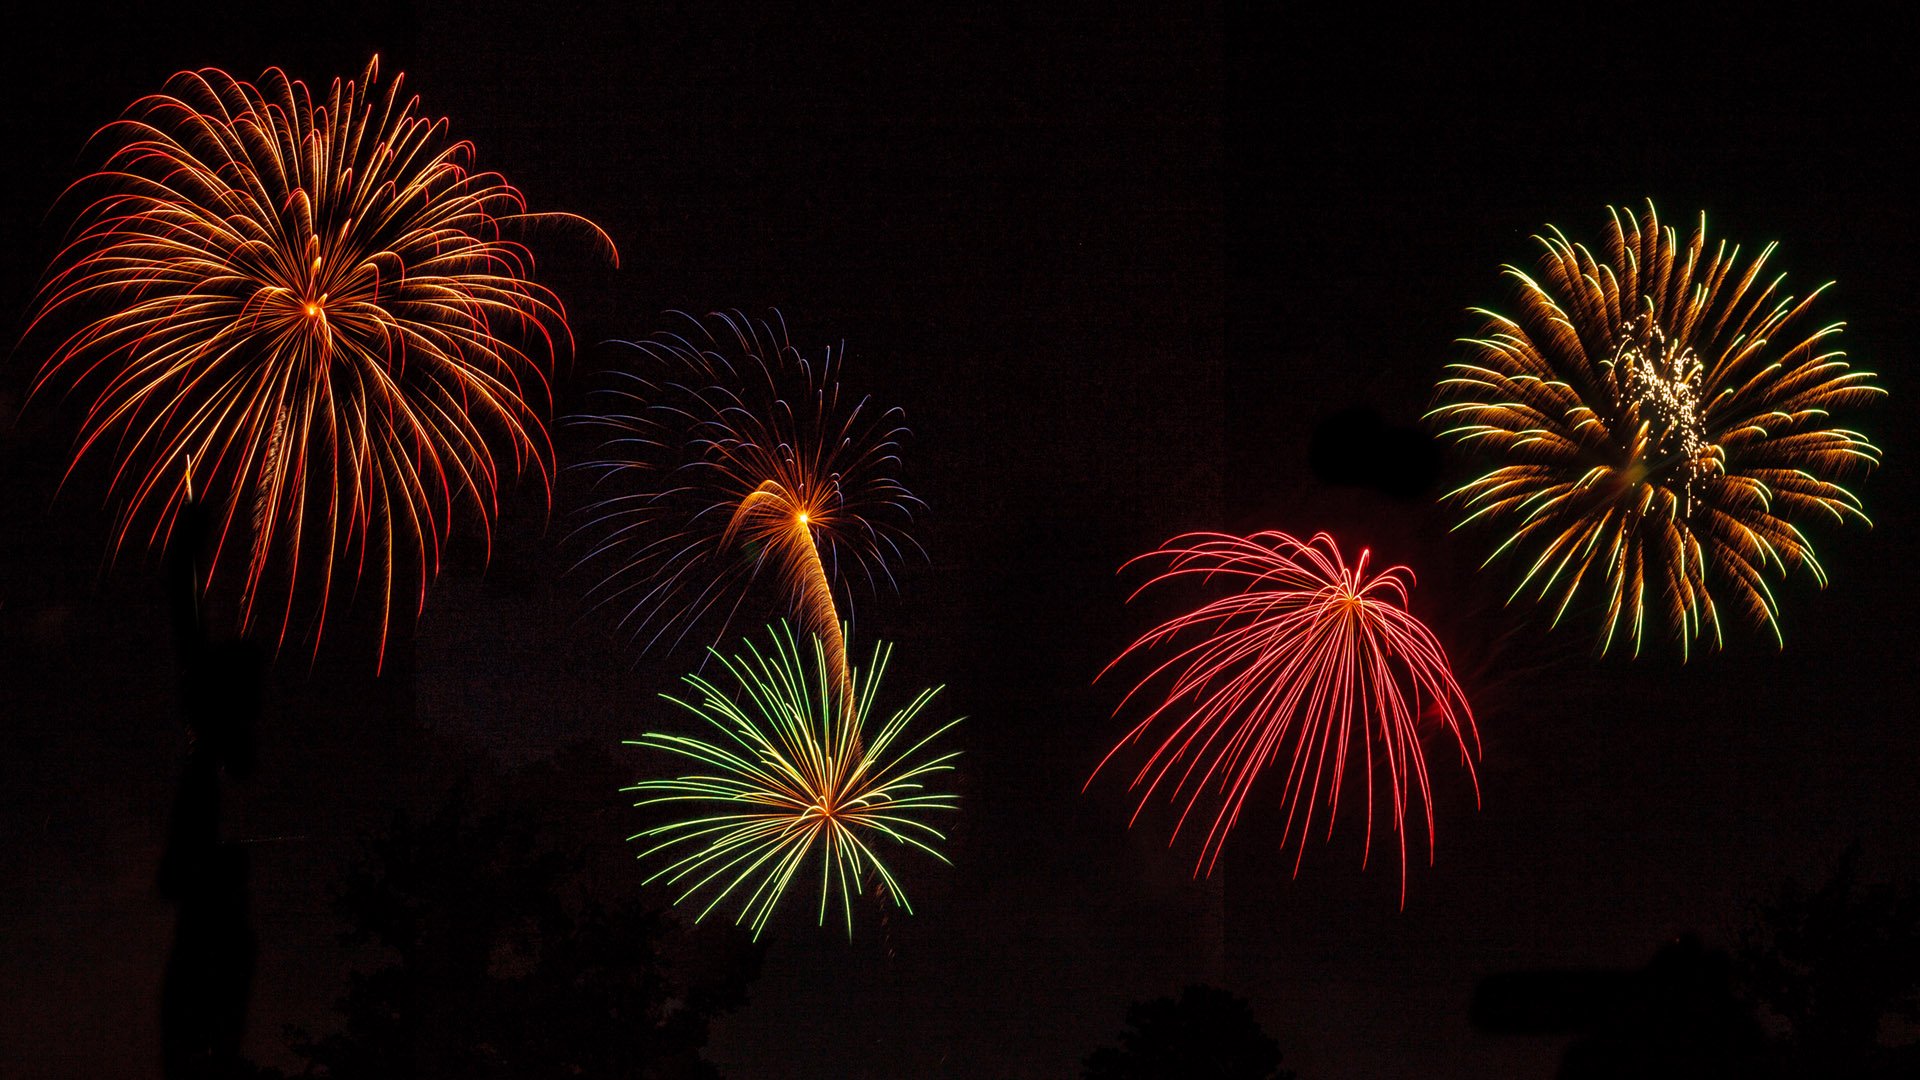 Finish Fireworks Photos in Lightroom! It's Easy